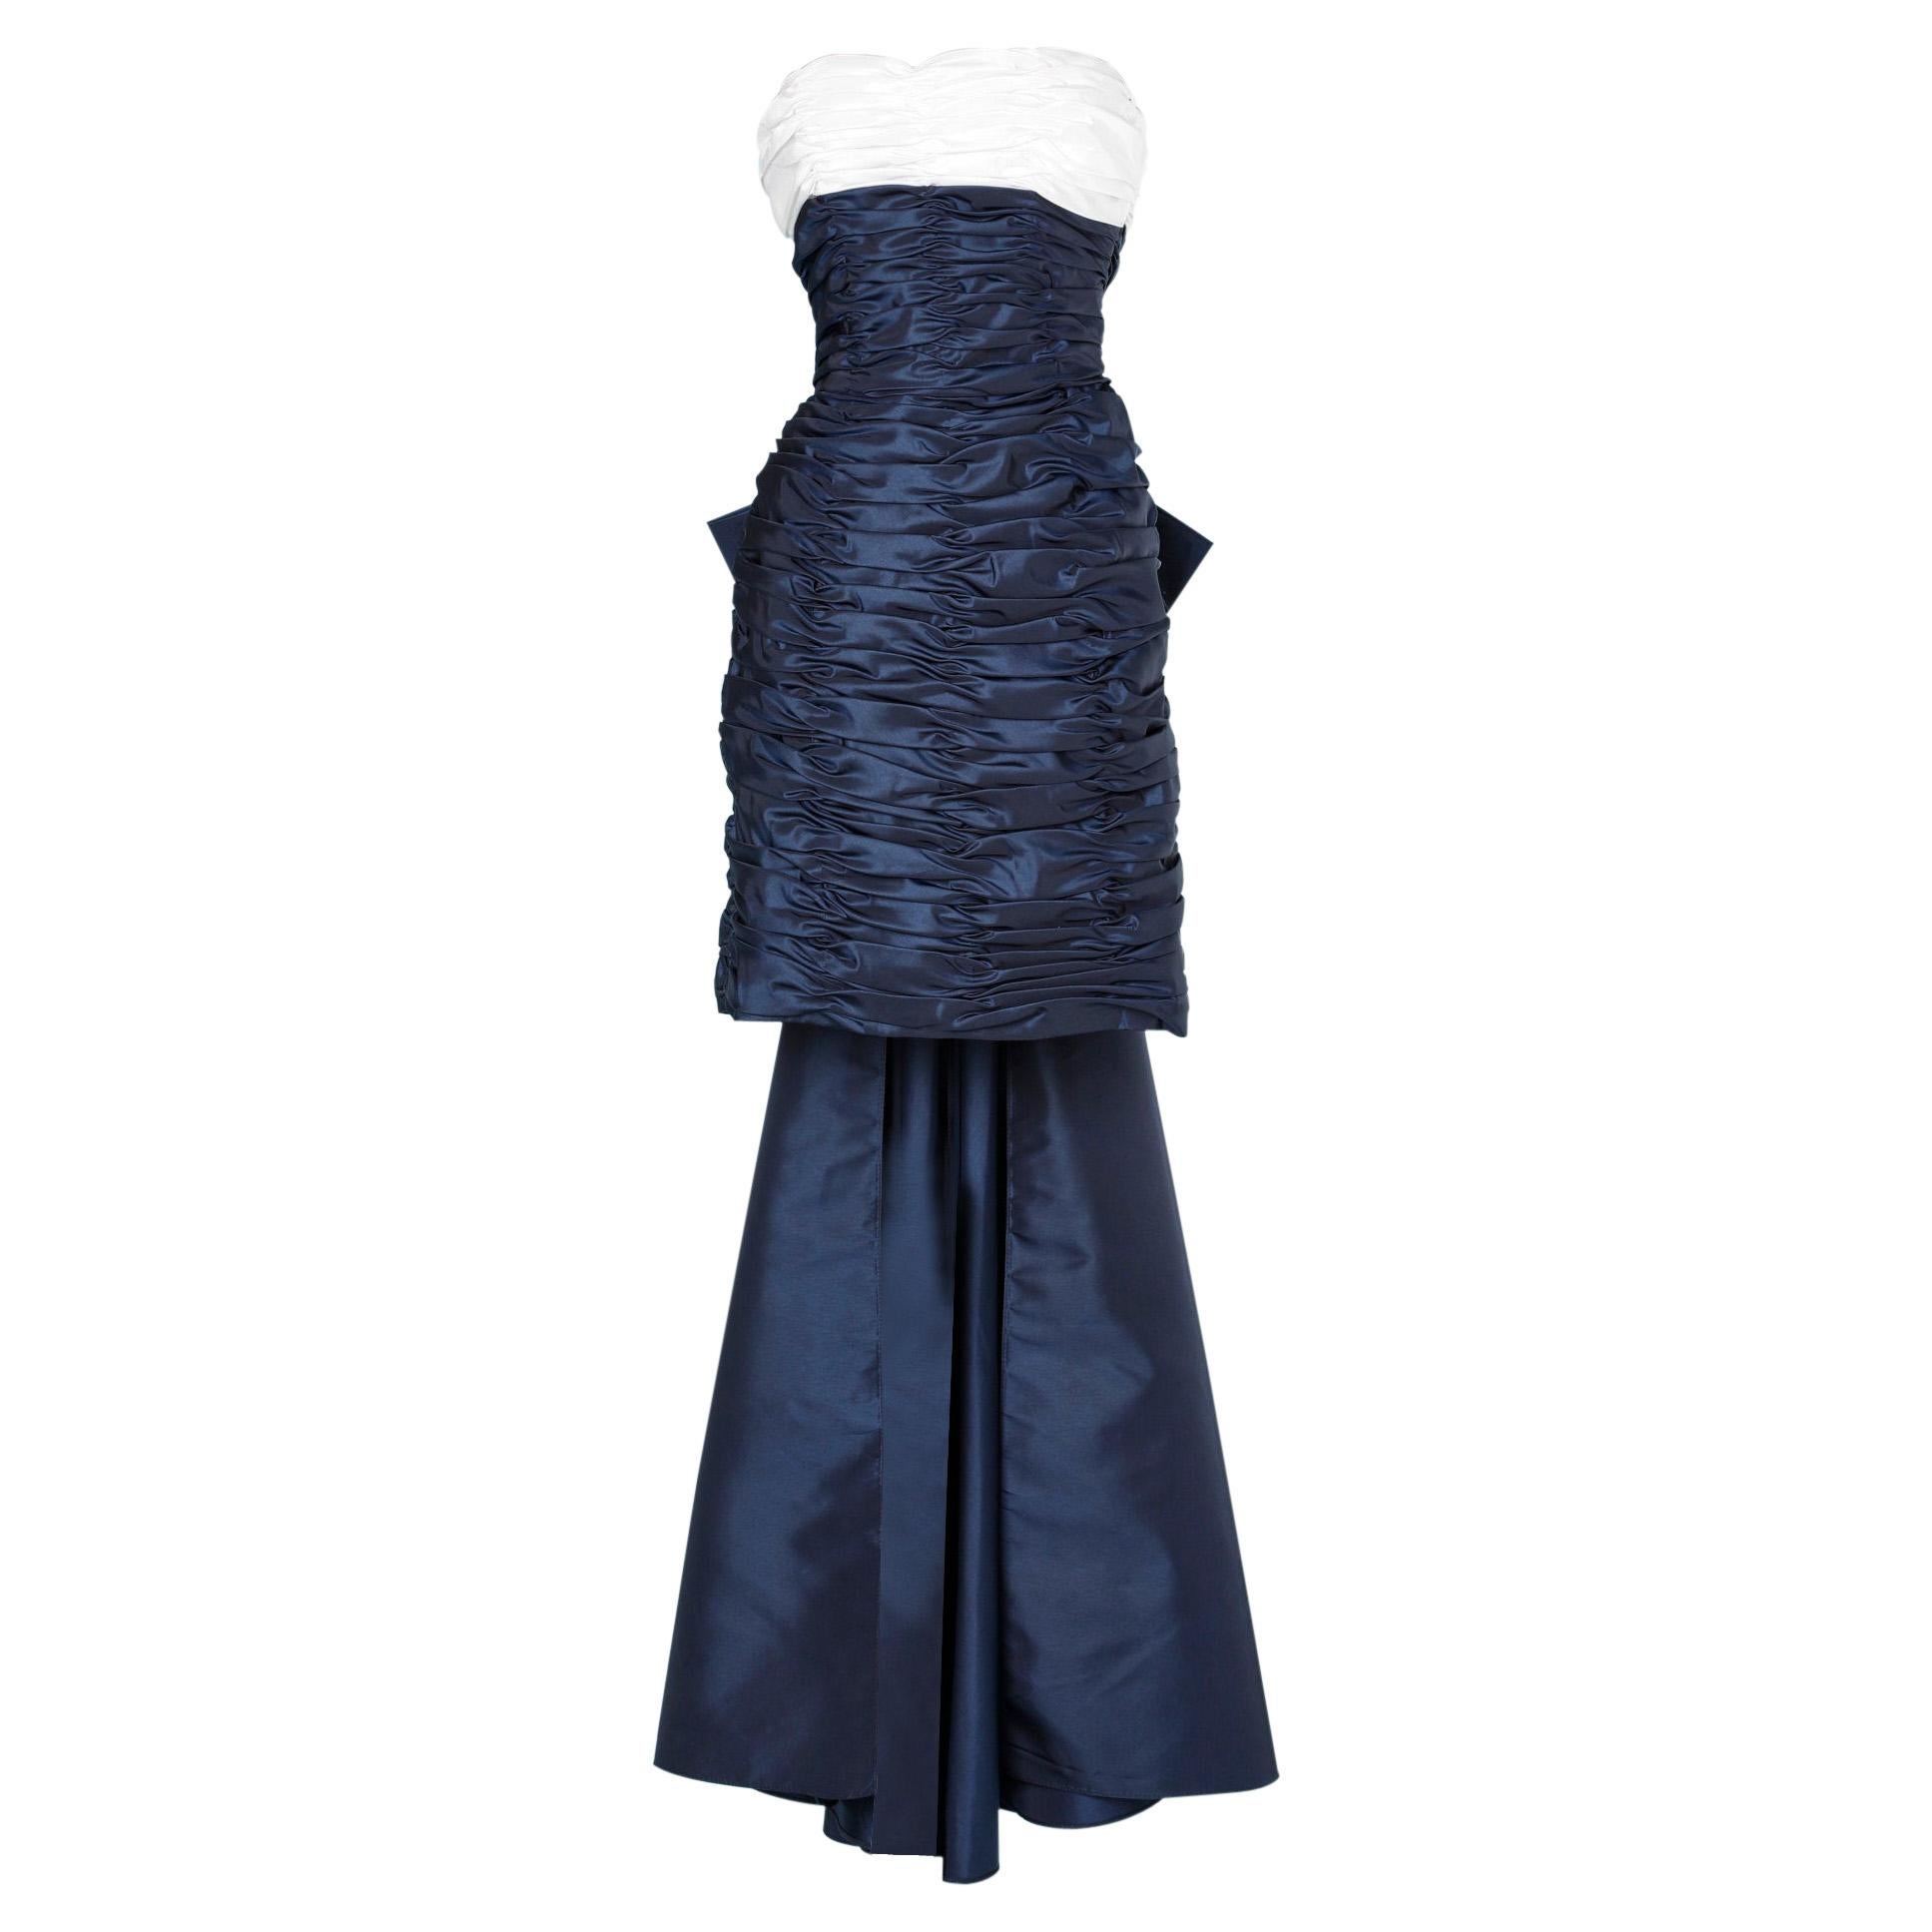 Navy blue and white 80's cocktail dress Victor Costa for Bergdorf Goodman